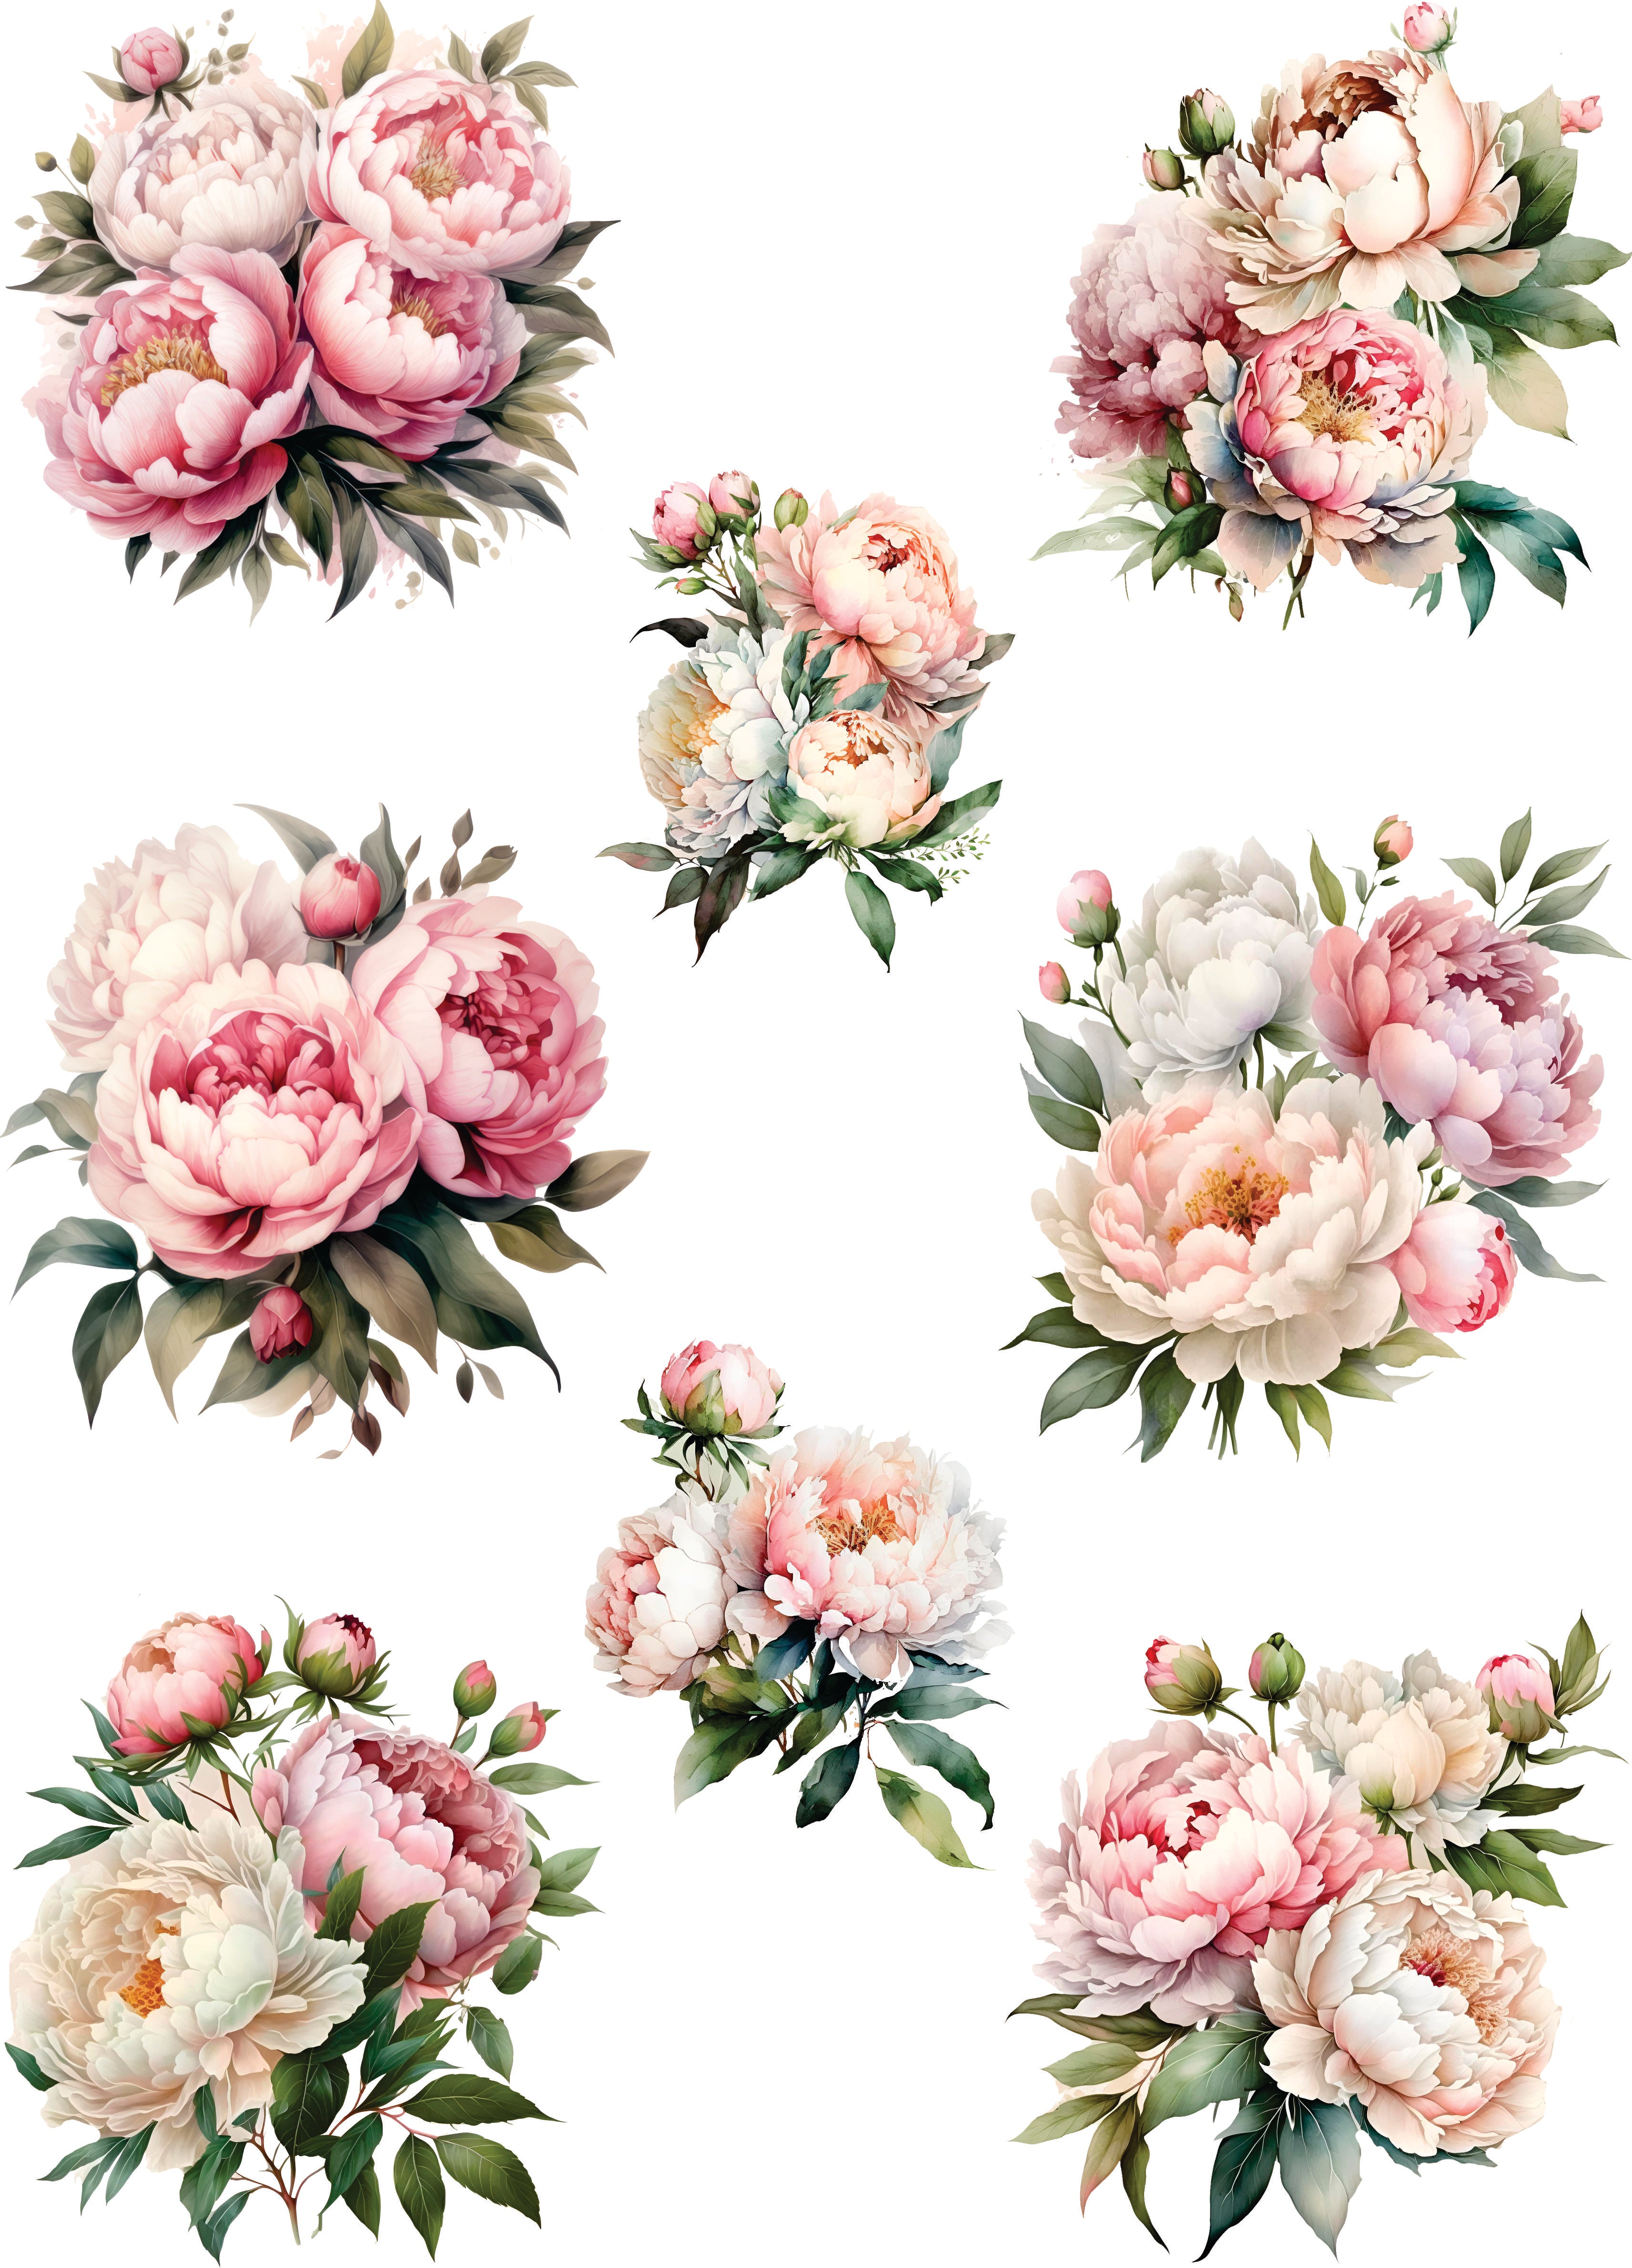 Peony Bouquet Rice Paper- 8 Unique Peony Bouquet Images Printed on 36gsm